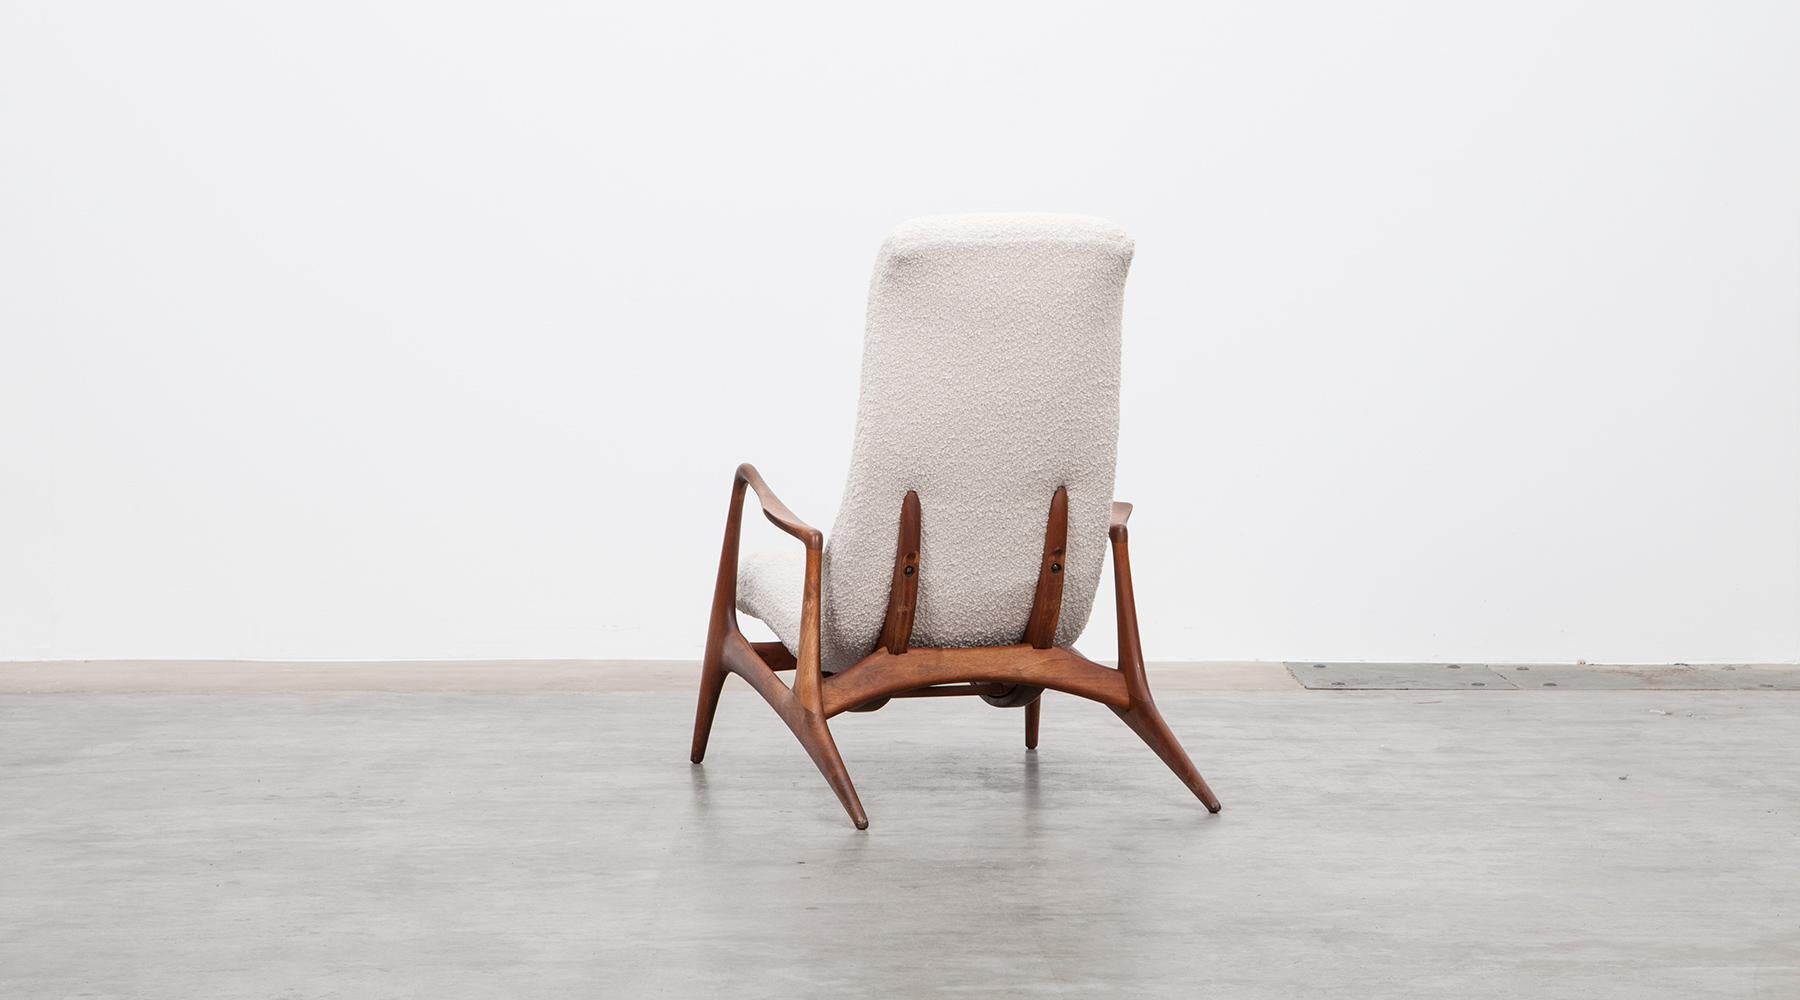 1950s Teak and White Upholstery Lounge Chair by Vladimir Kagan 12